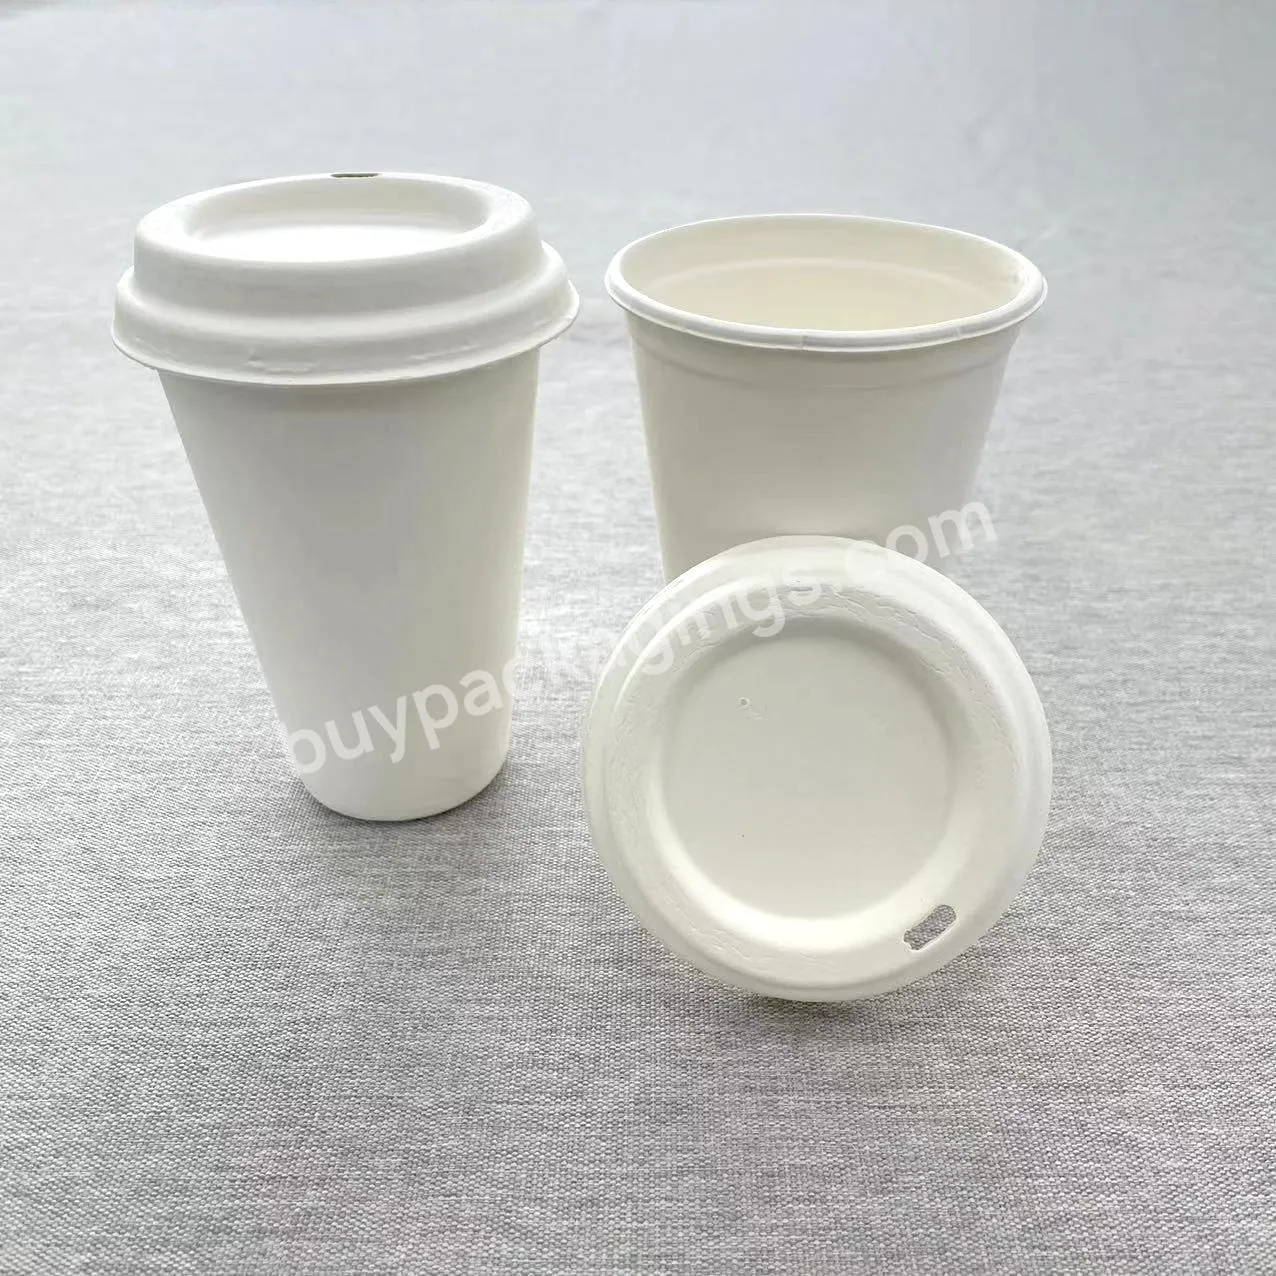 Bamboo Bagasse Fiber 100% Biodegradable Disposable Cafe Coffee Drinkware Paper Cup For Hot And Cold Drinks - Buy Biodegradable Disposable Cafe Coffee Paper Cup,Drinkware Paper Cup,Biodegradable Paper Coffee Cup.